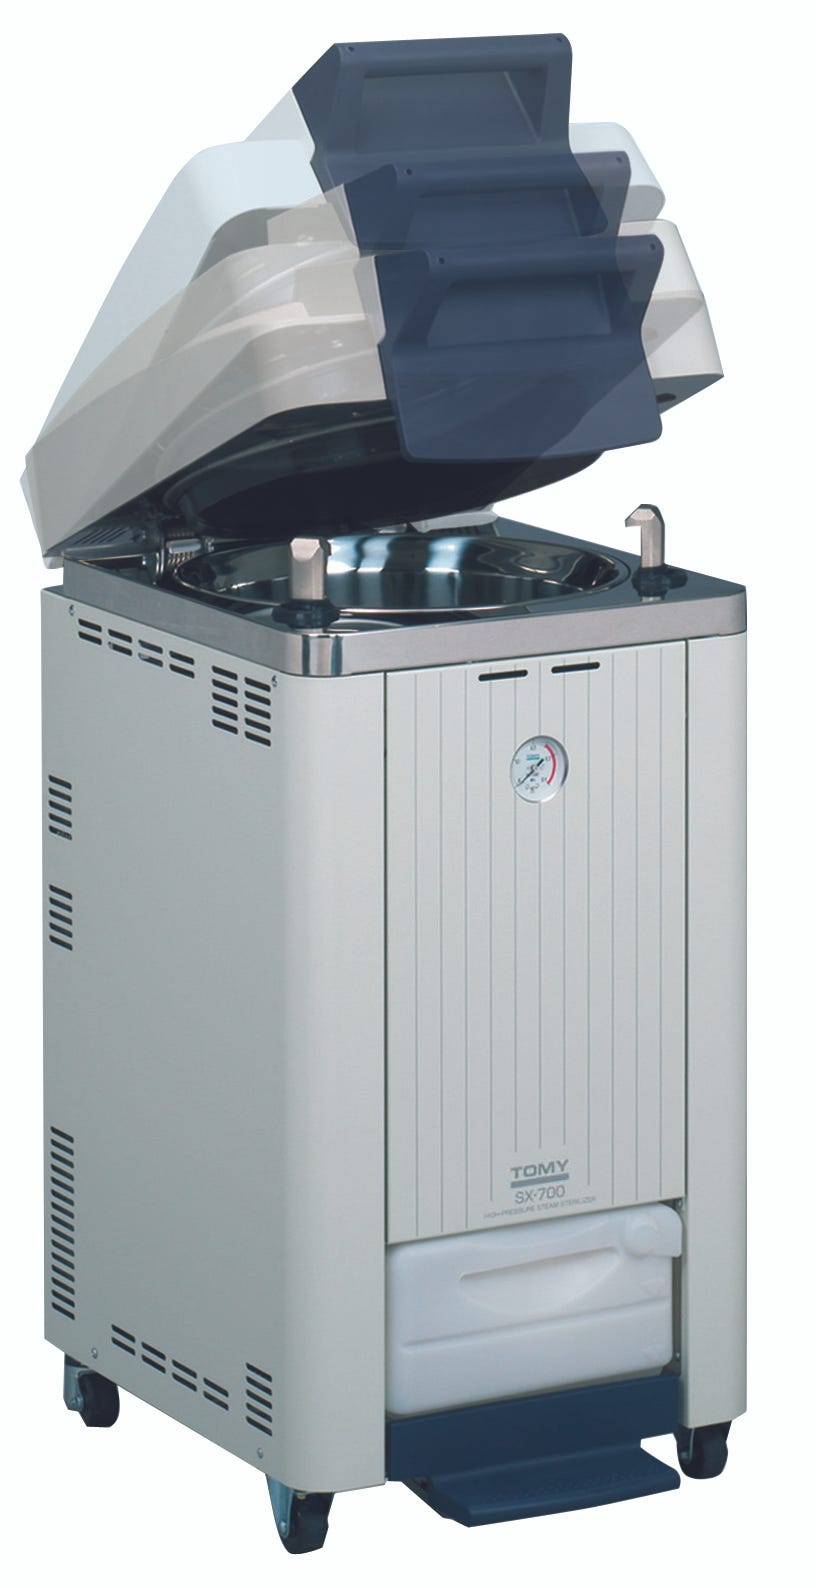 TOMY SX-700 Lab Autoclave Sterilizer, floor standing autoclave, opening lid into sterilizing chamber